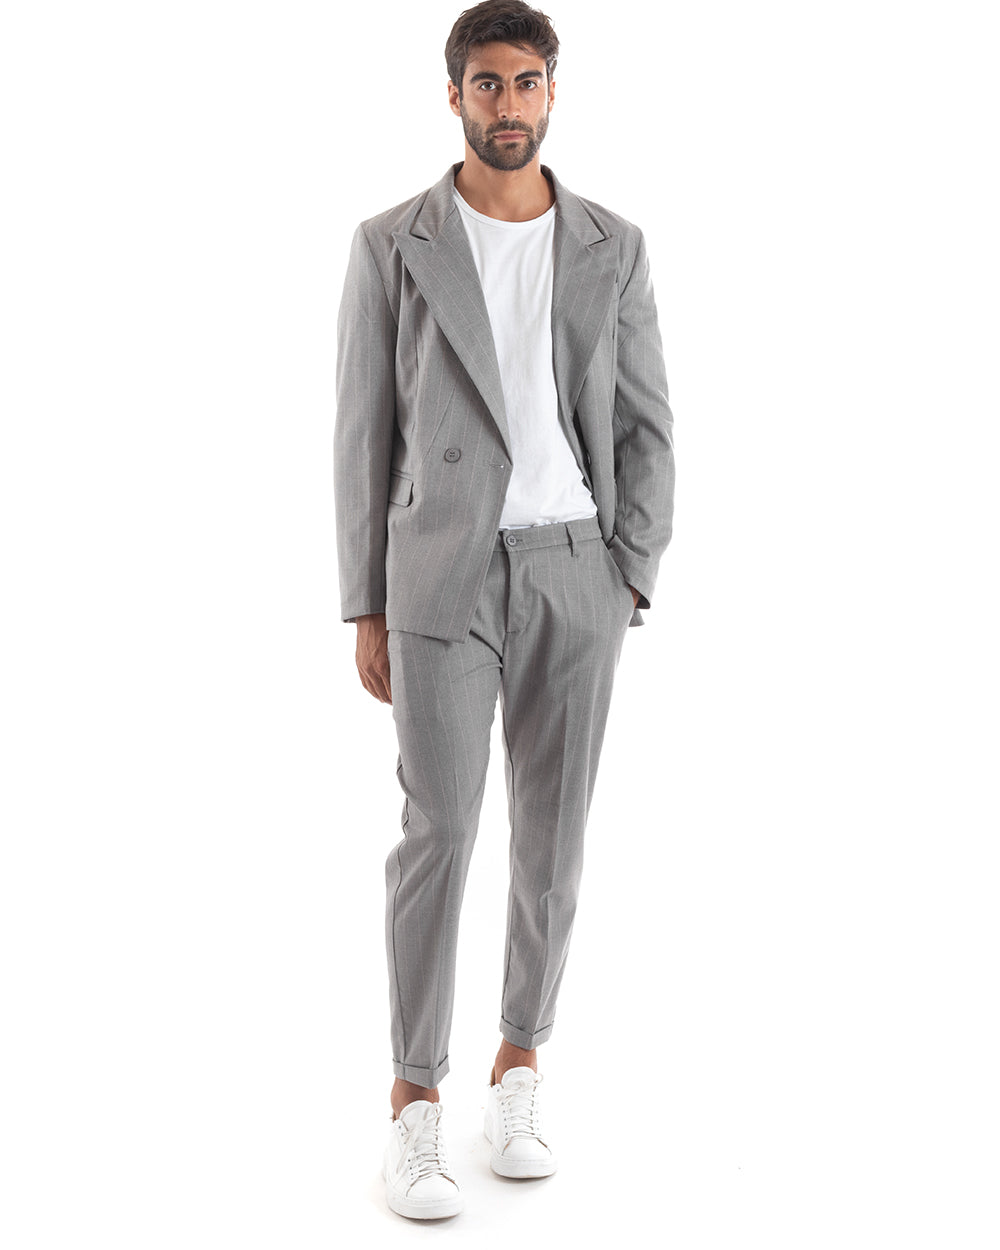 Double-Breasted Men's Suit Viscose Suit Jacket Trousers Gray Elegant Ceremony GIOSAL-OU2153A